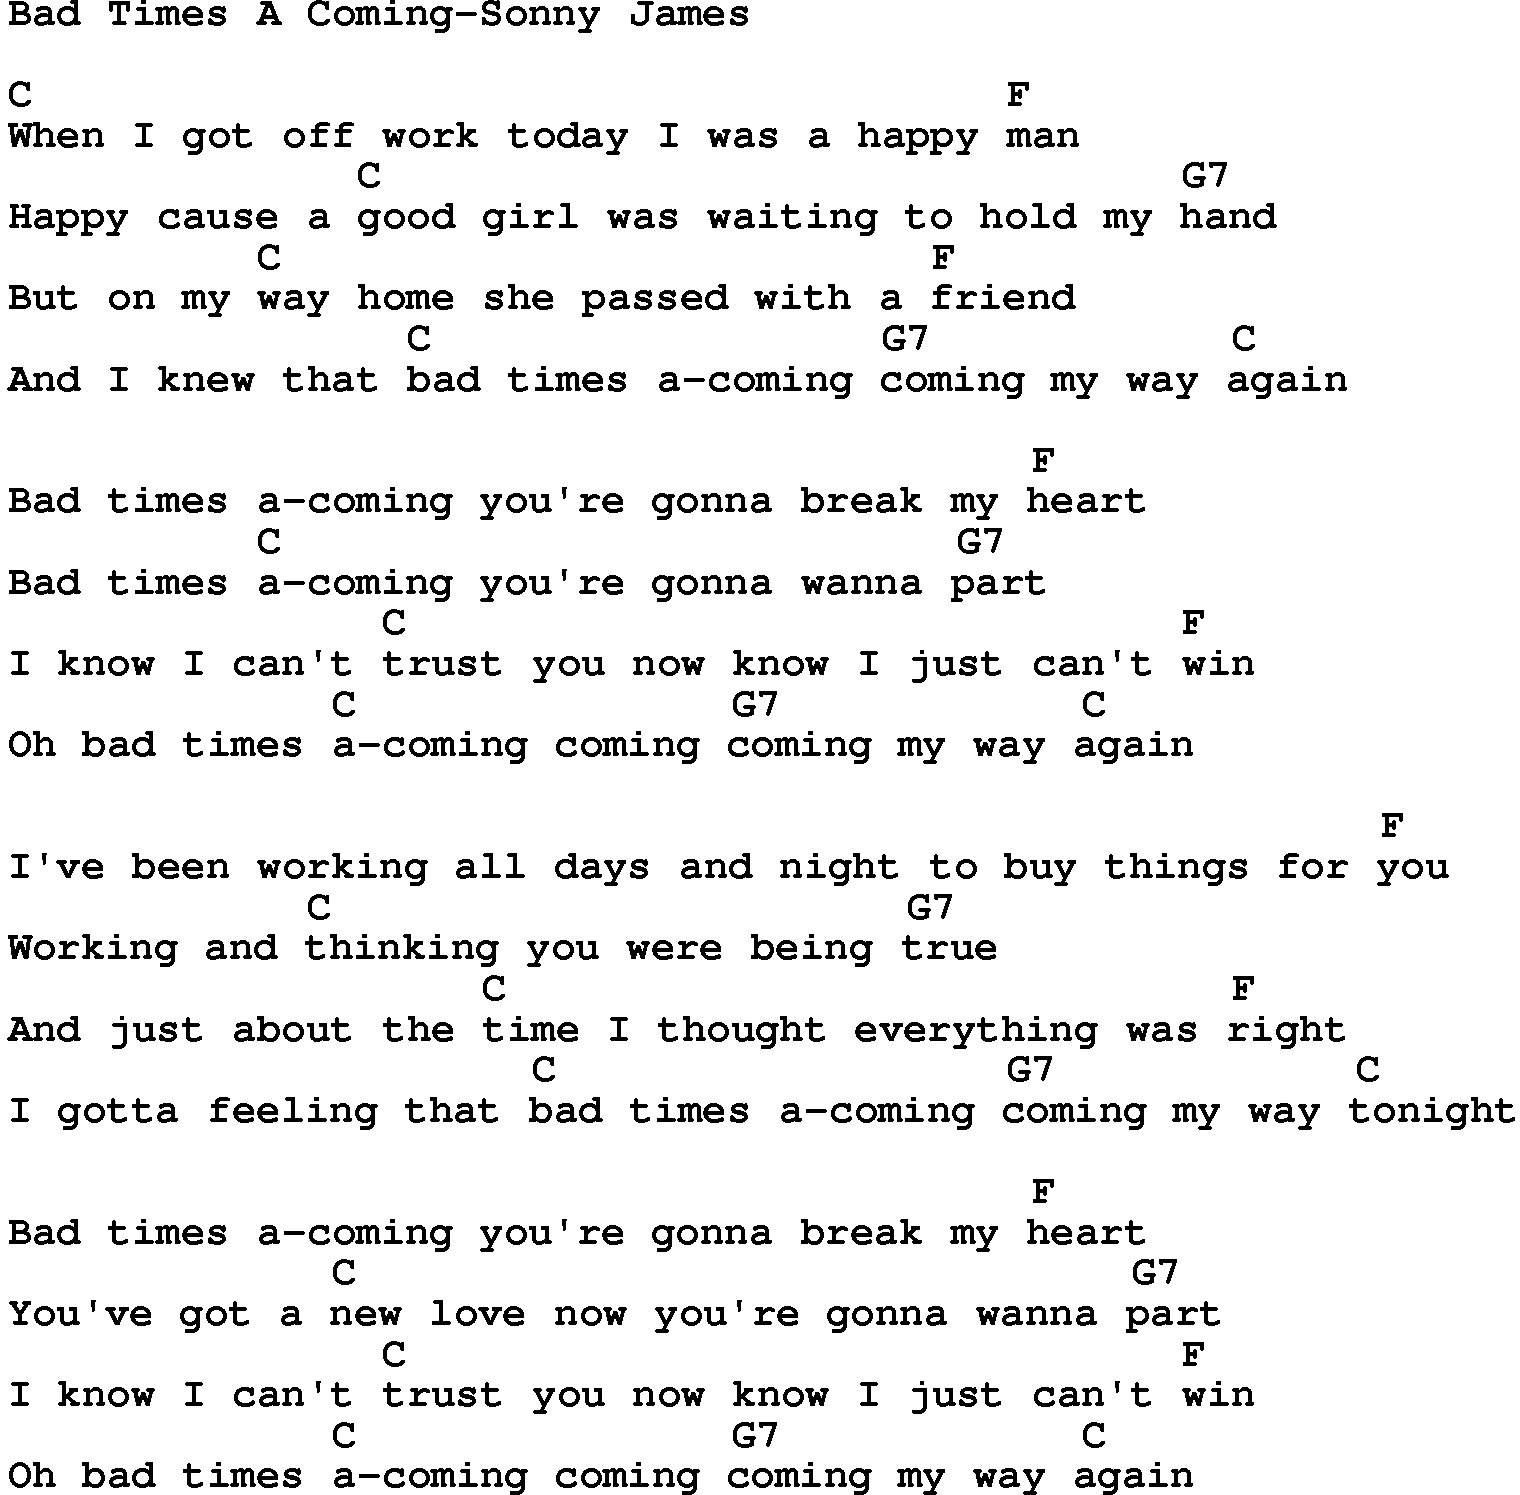 Country music song: Bad Times A Coming-Sonny James lyrics and chords